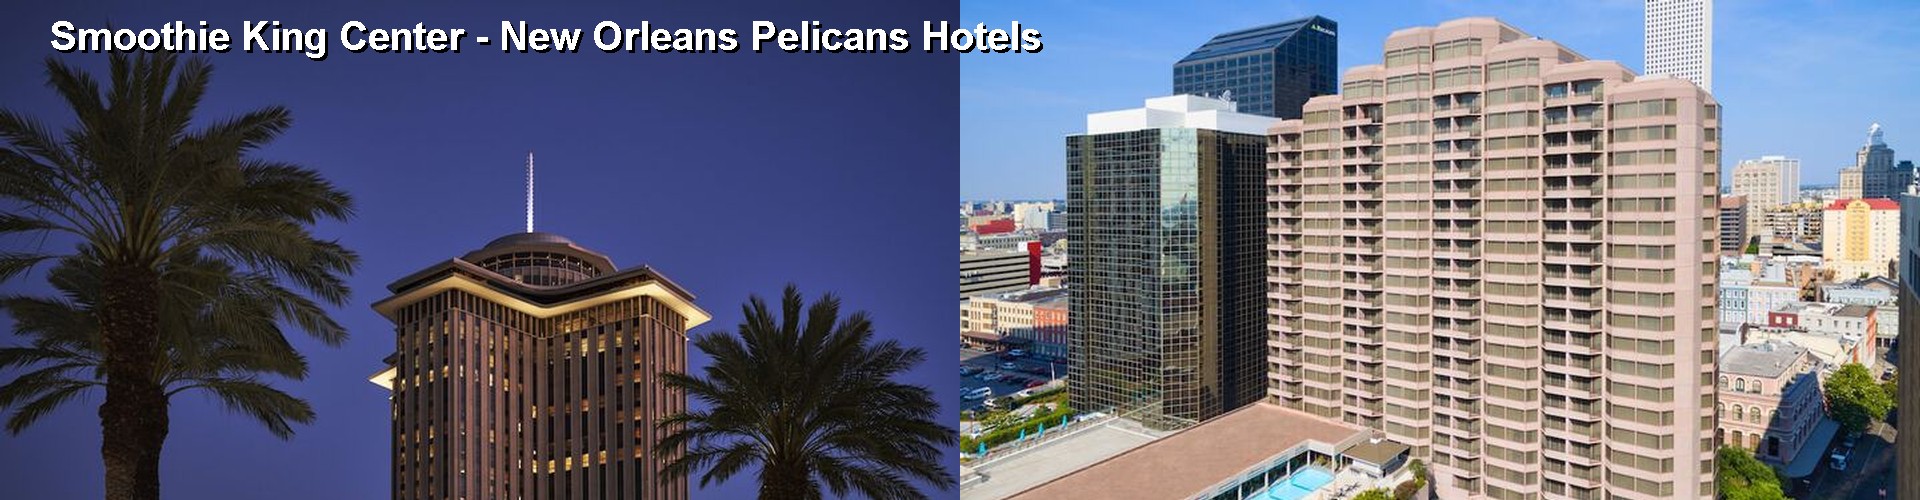 4 Best Hotels near Smoothie King Center - New Orleans Pelicans